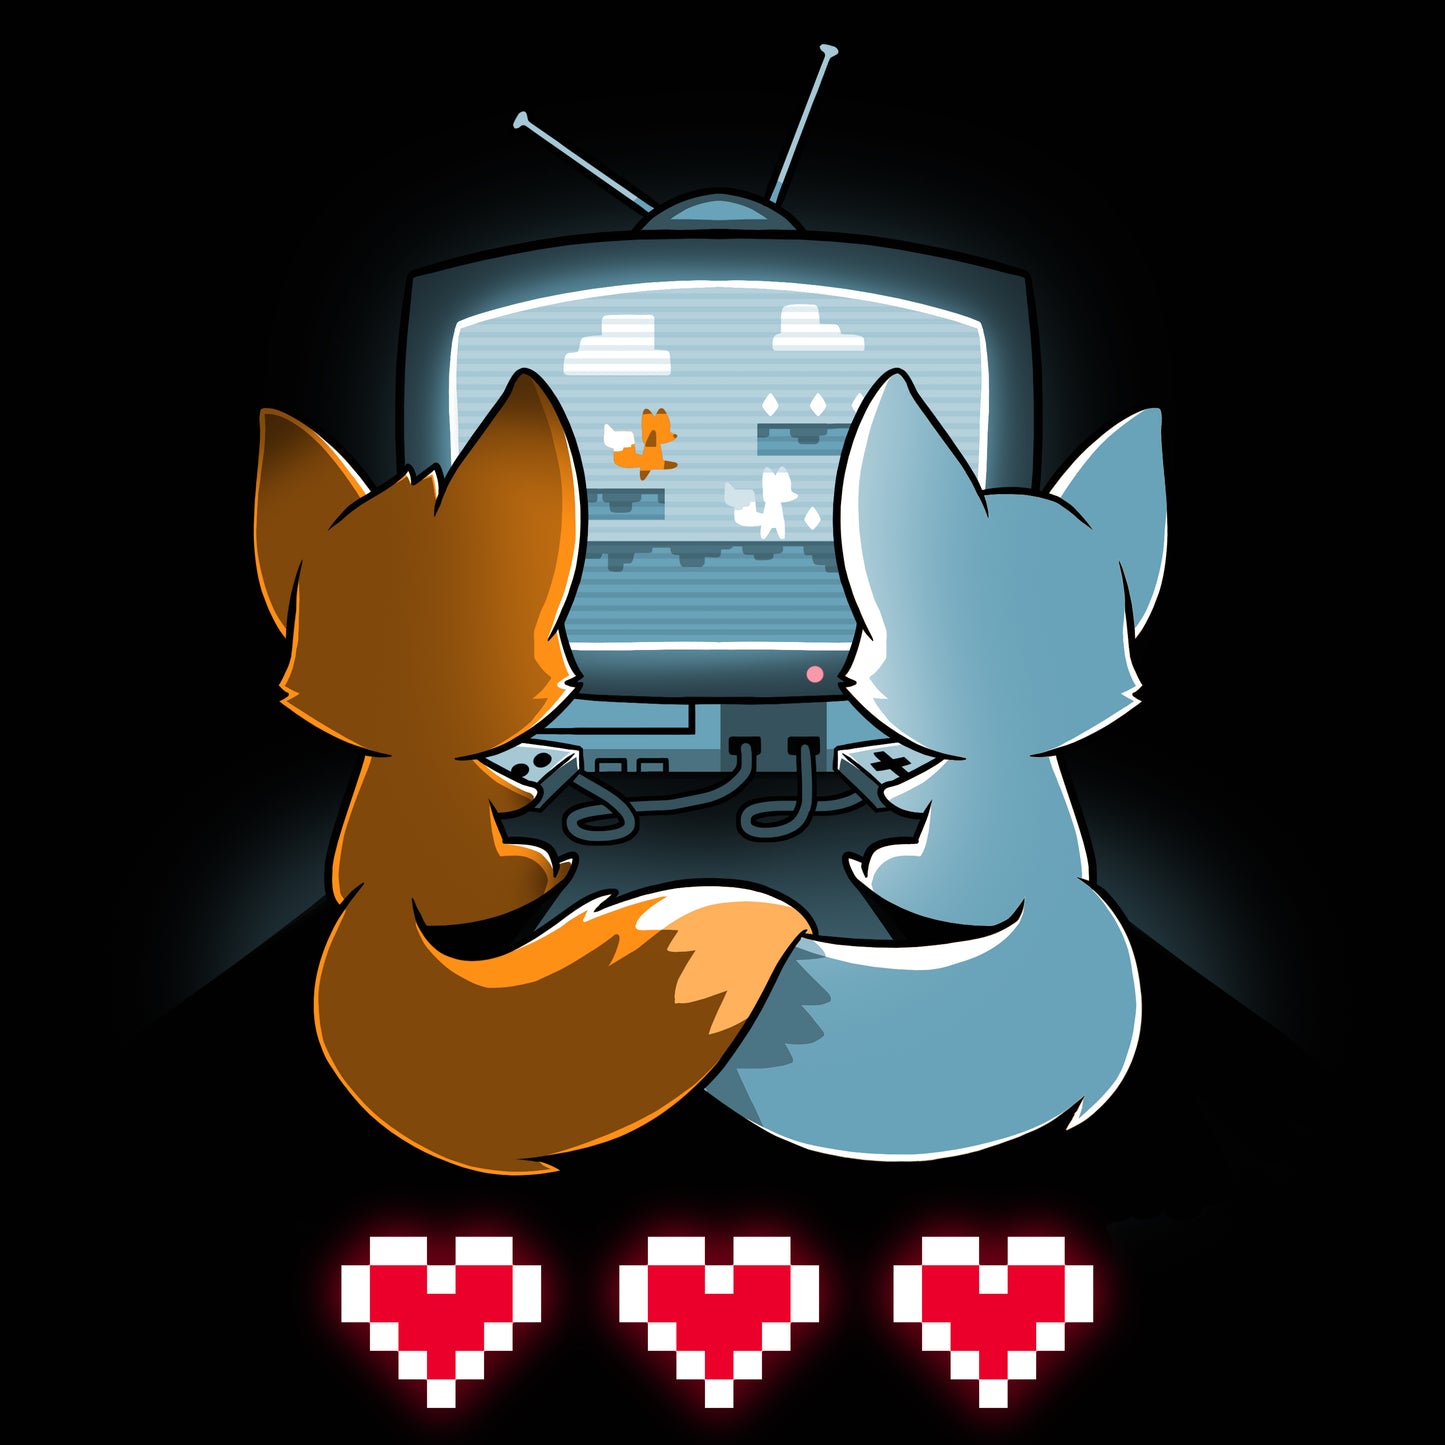 Two foxes playing video games in front of a television wearing TeeTurtle's Fur the Love of Gaming gaming t-shirts.